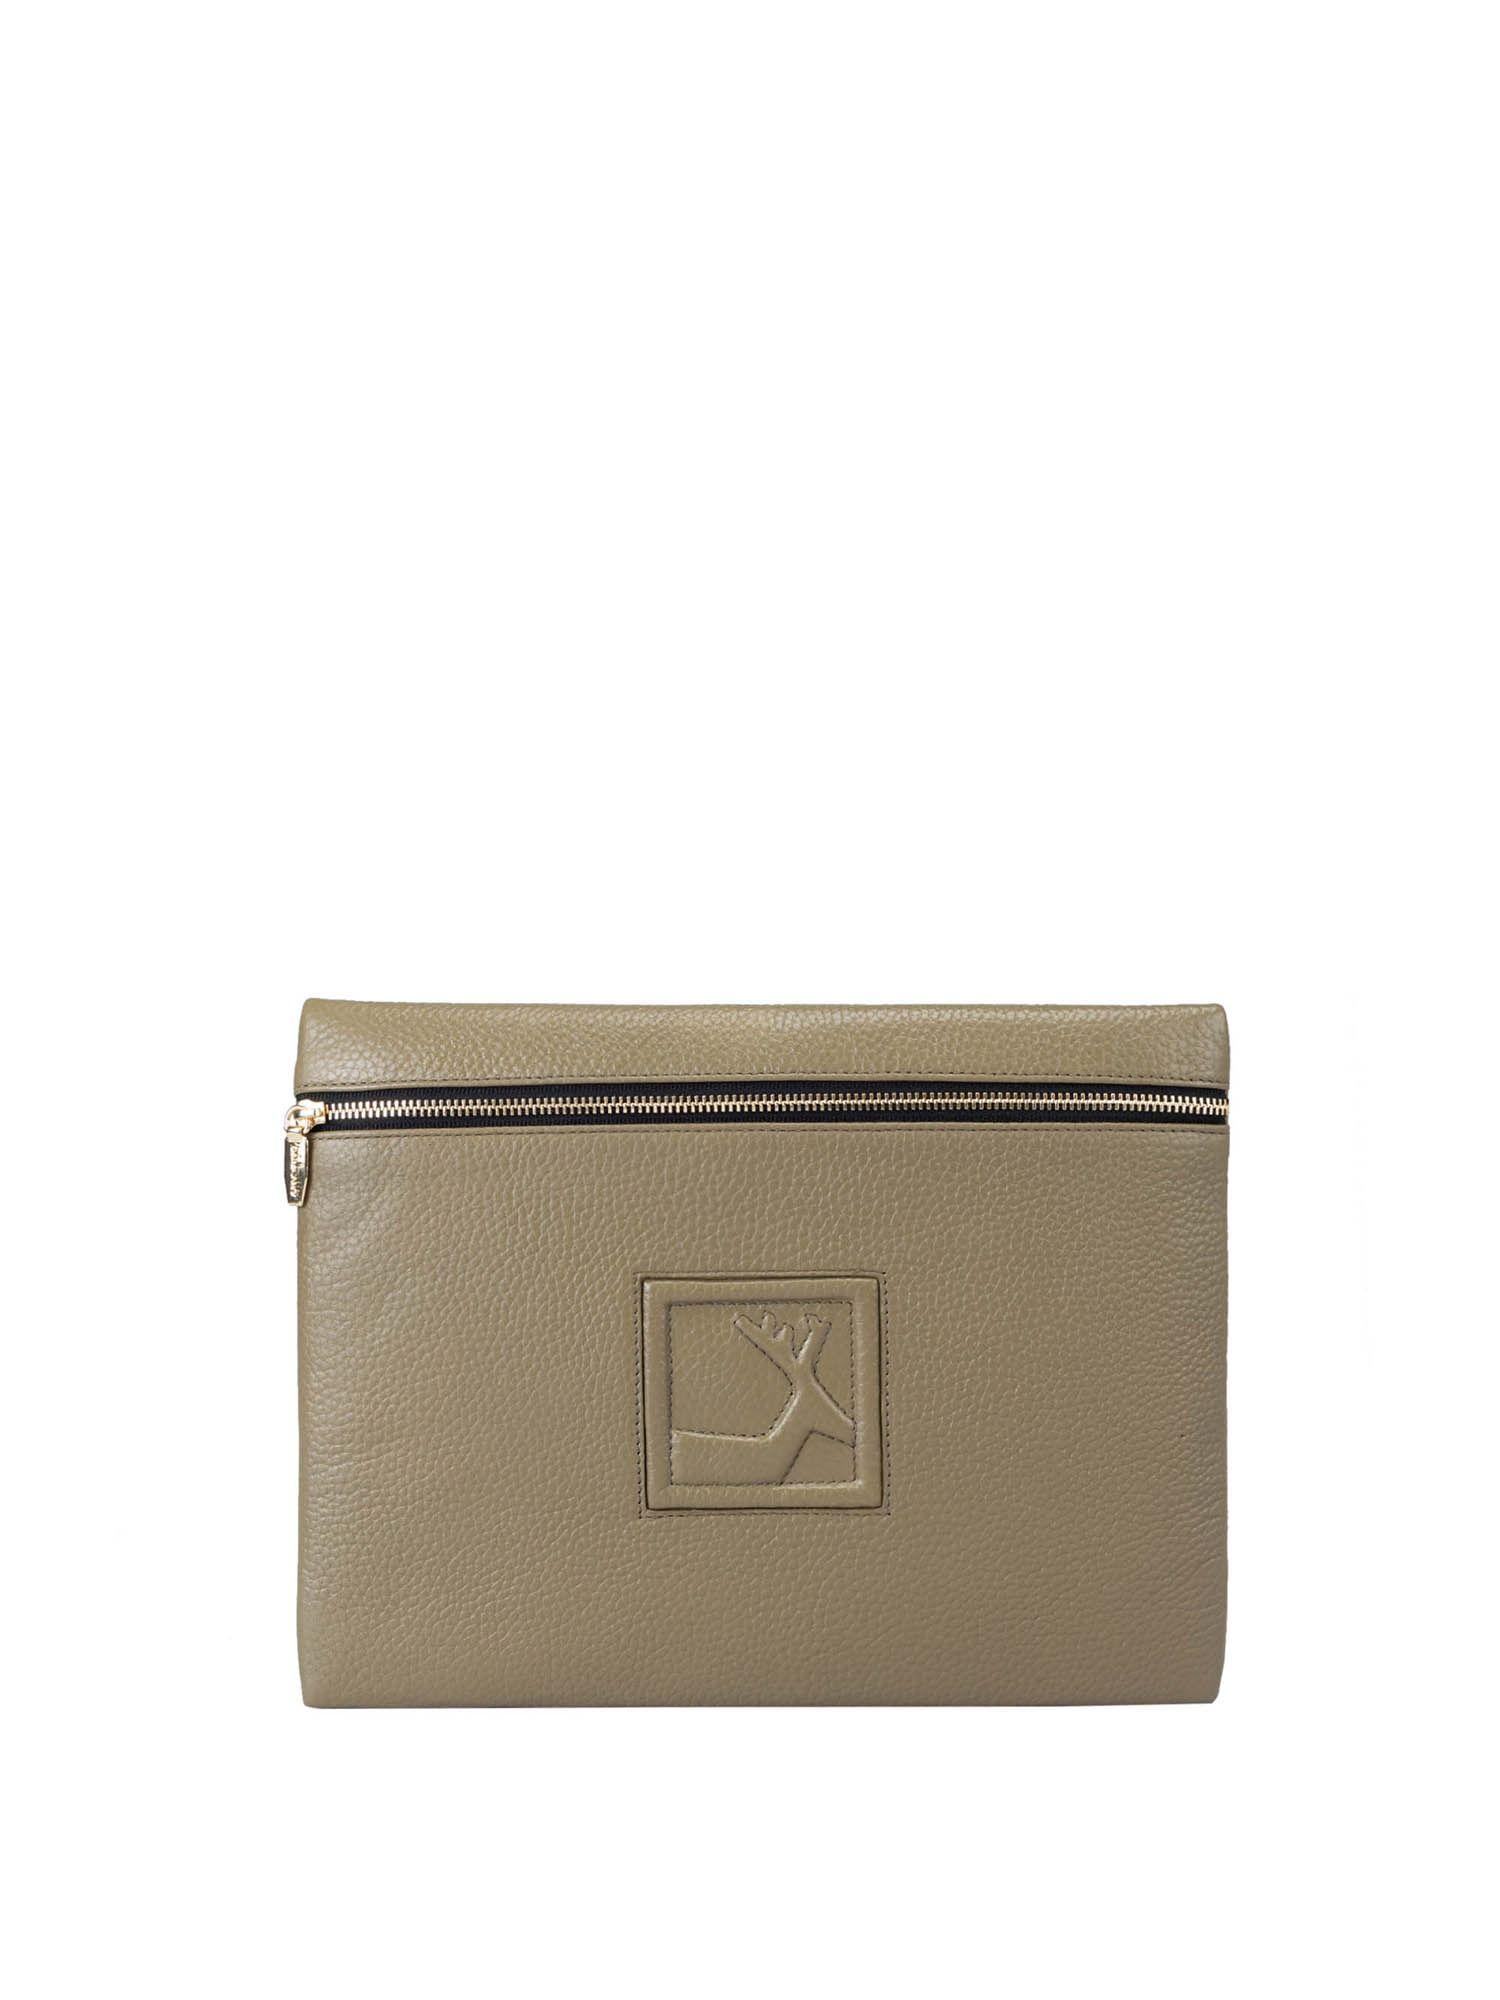 wax leather taupe pouch